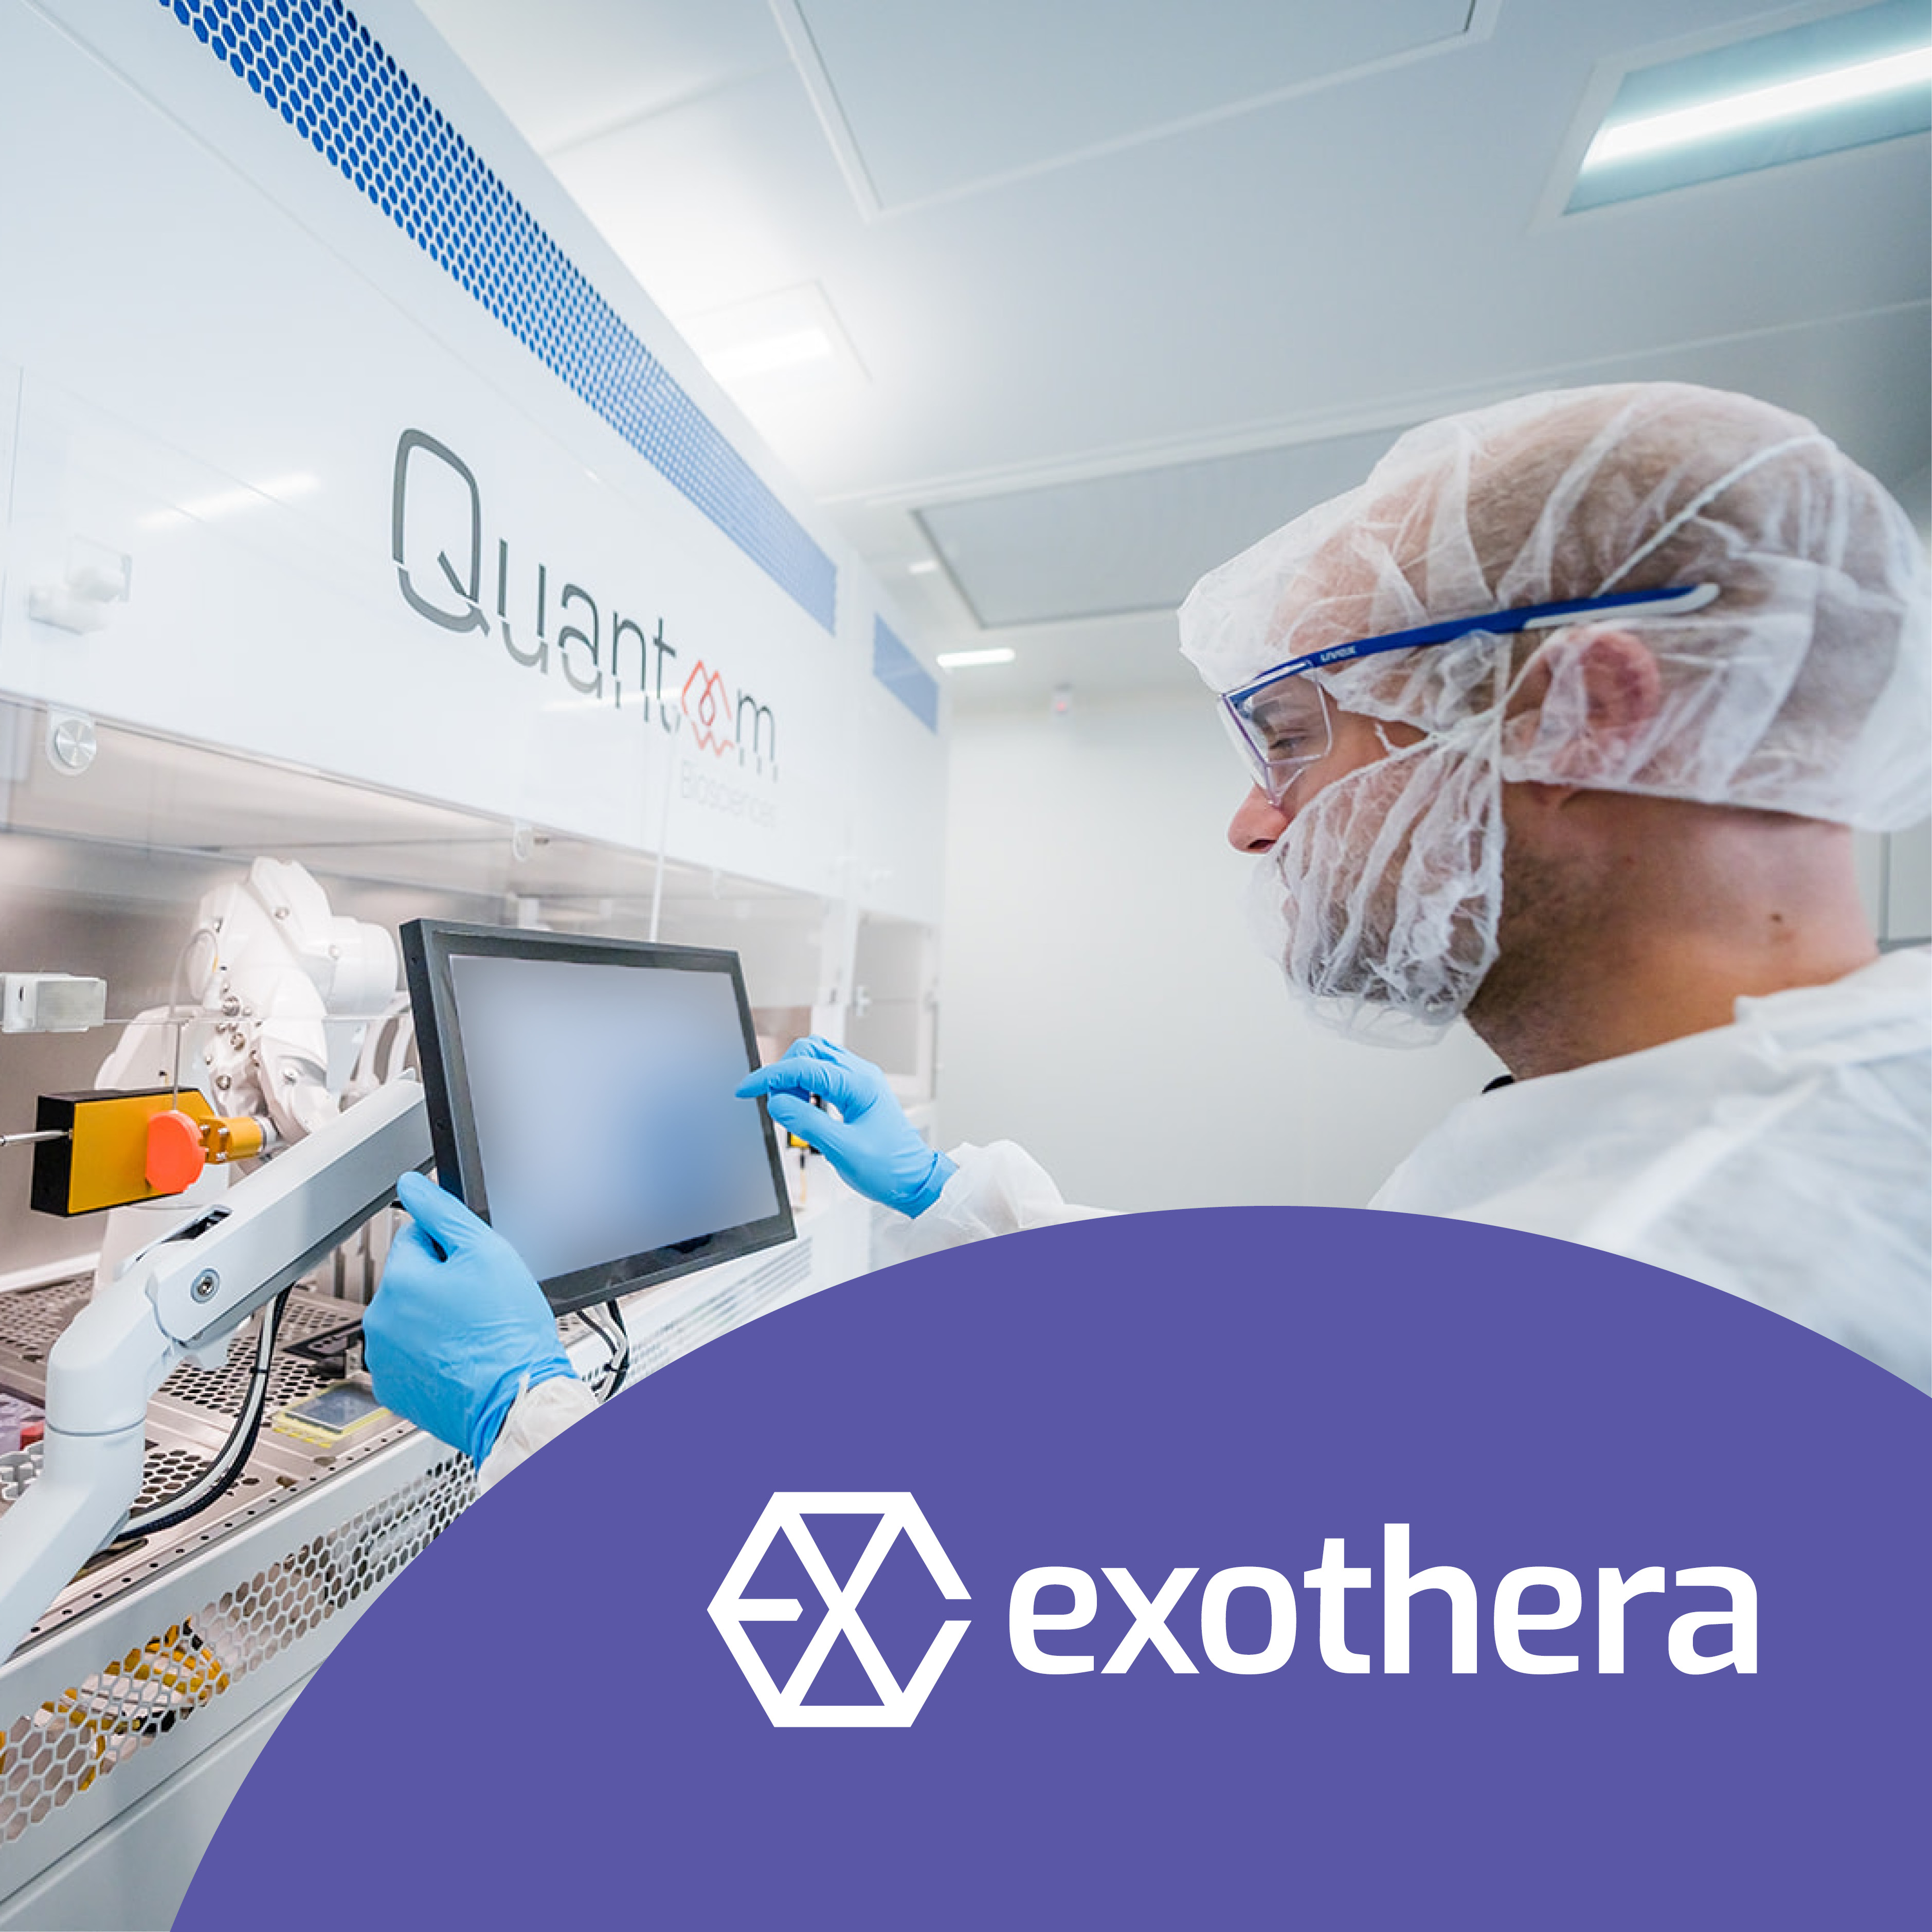 Exothera announces a strategic partnership with Quantoom Biosciences and launches a new business unit for the development and production of RNA